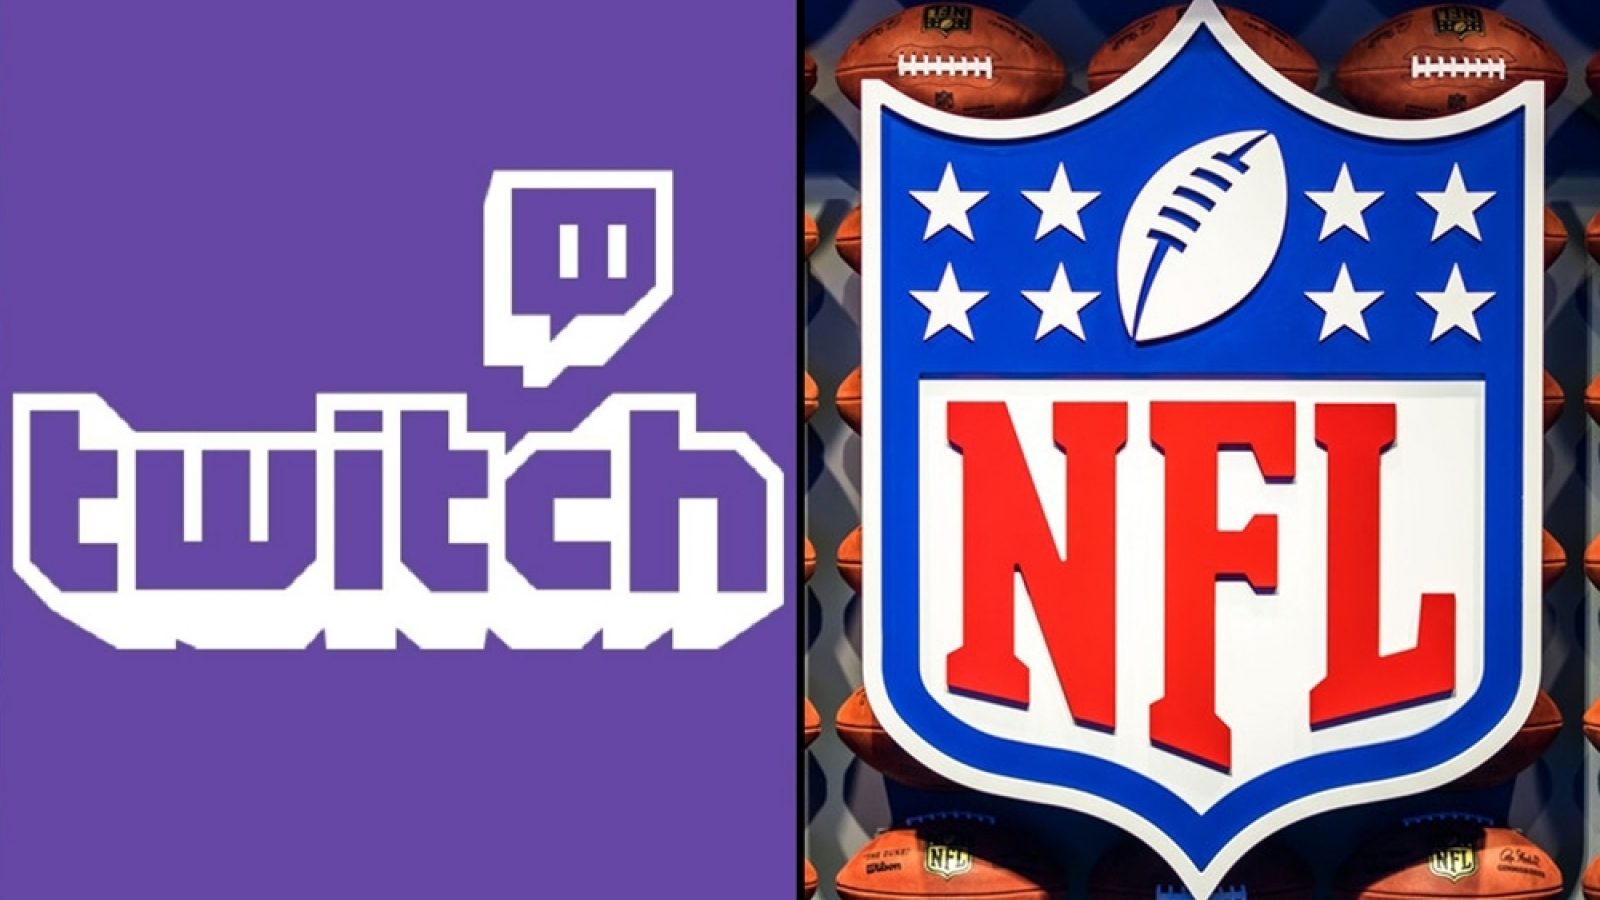 How to watch the Dolphins vs Texans NFL game on Twitch